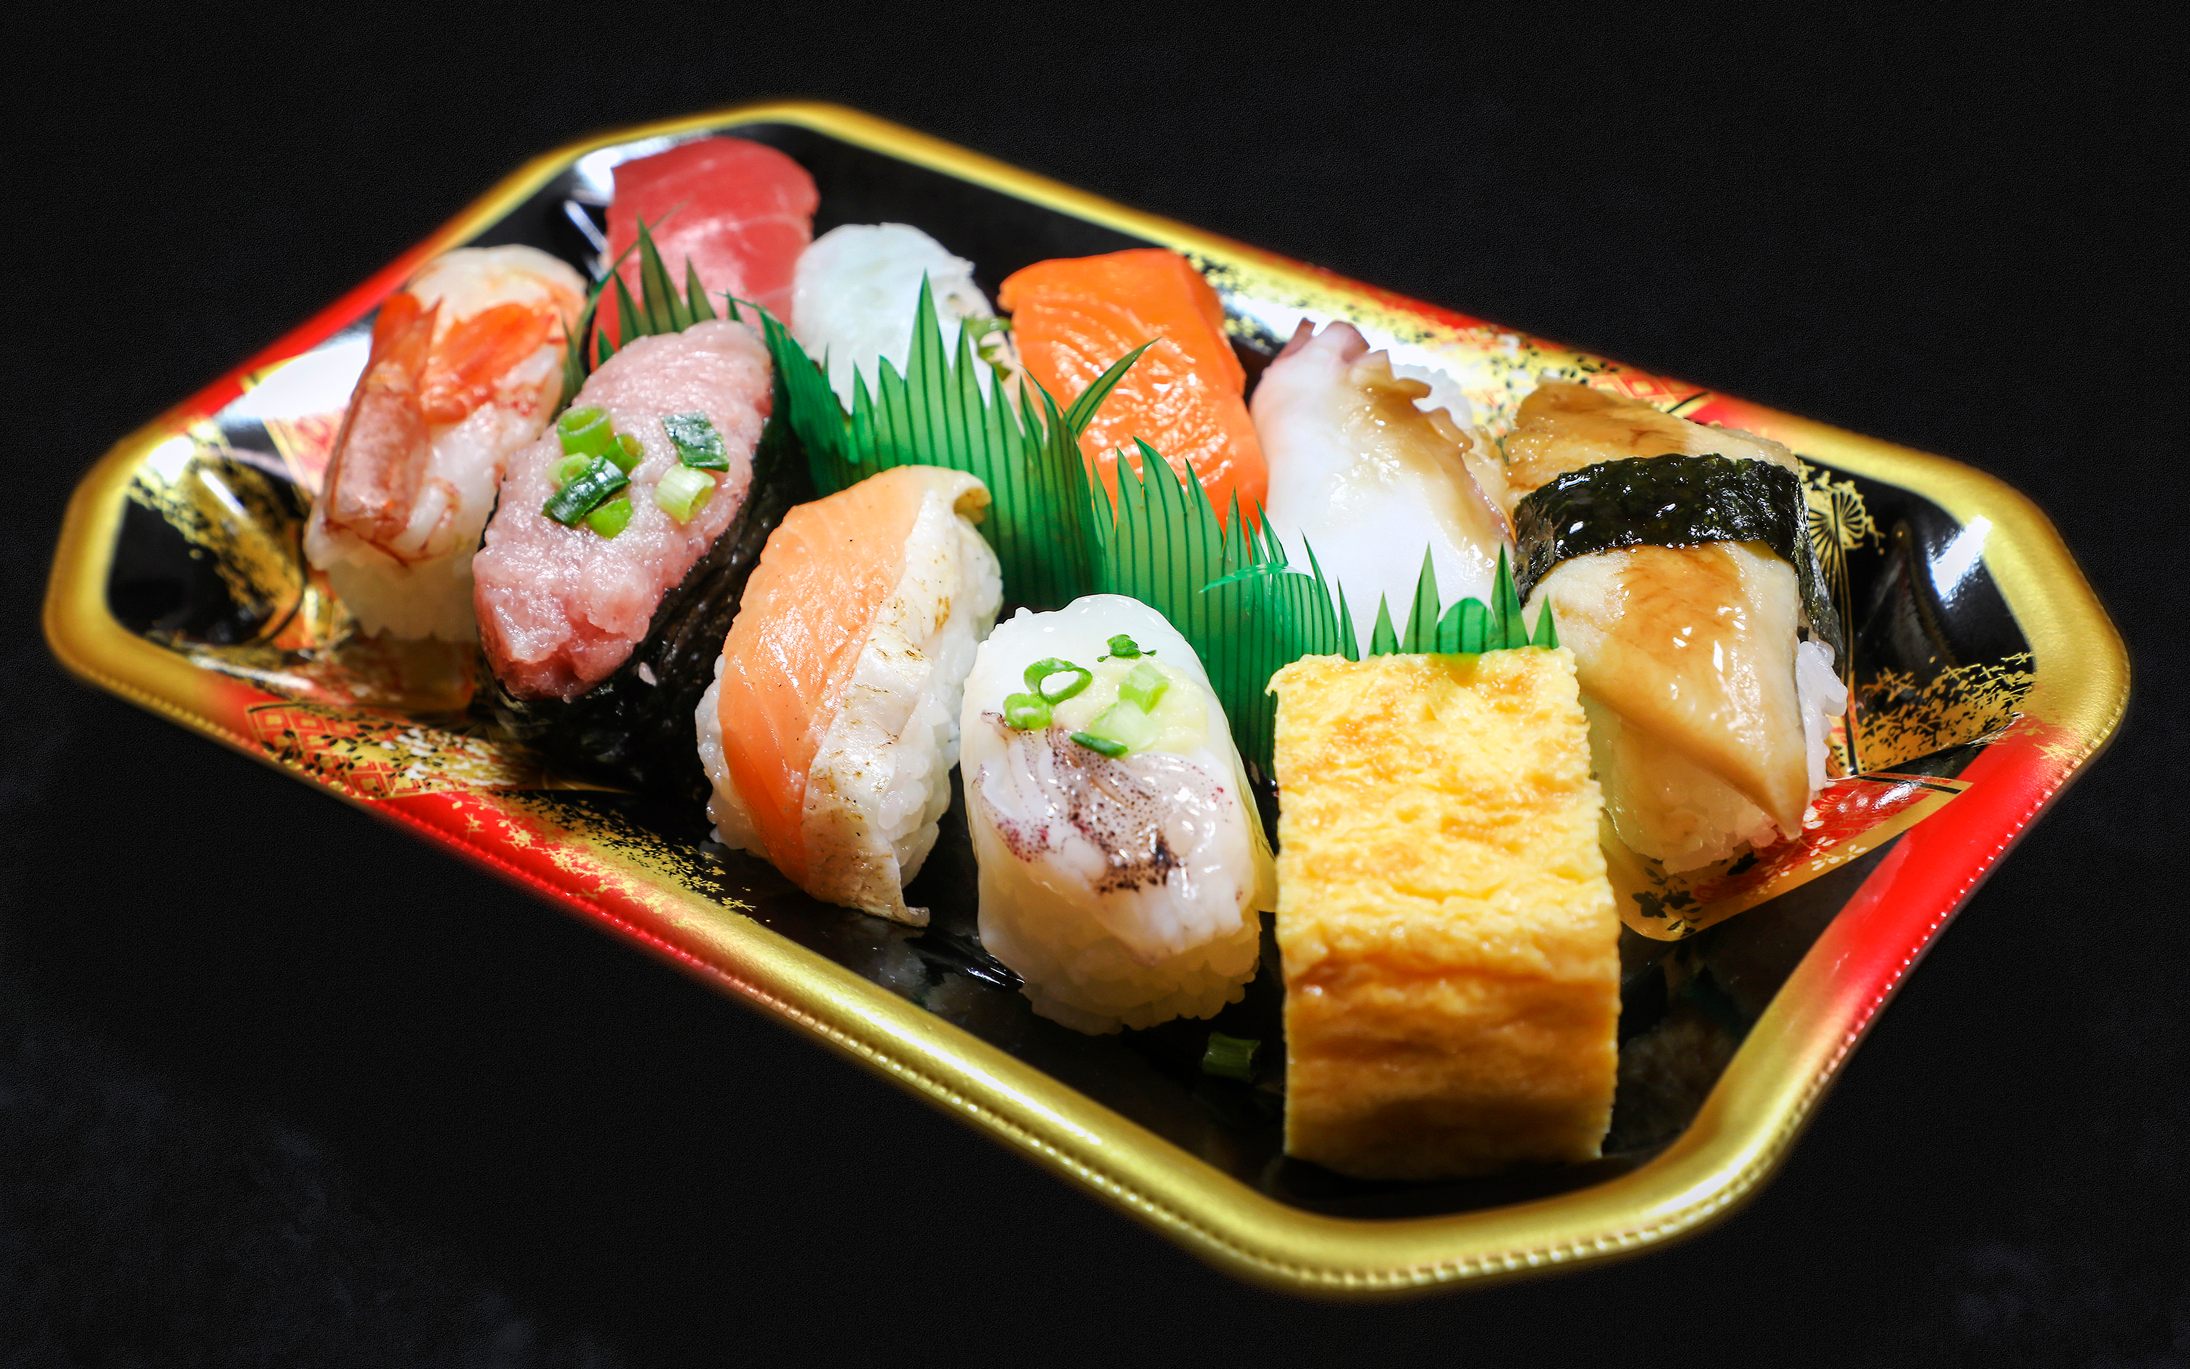 Plastic sushi trays can be extremely elaborate.